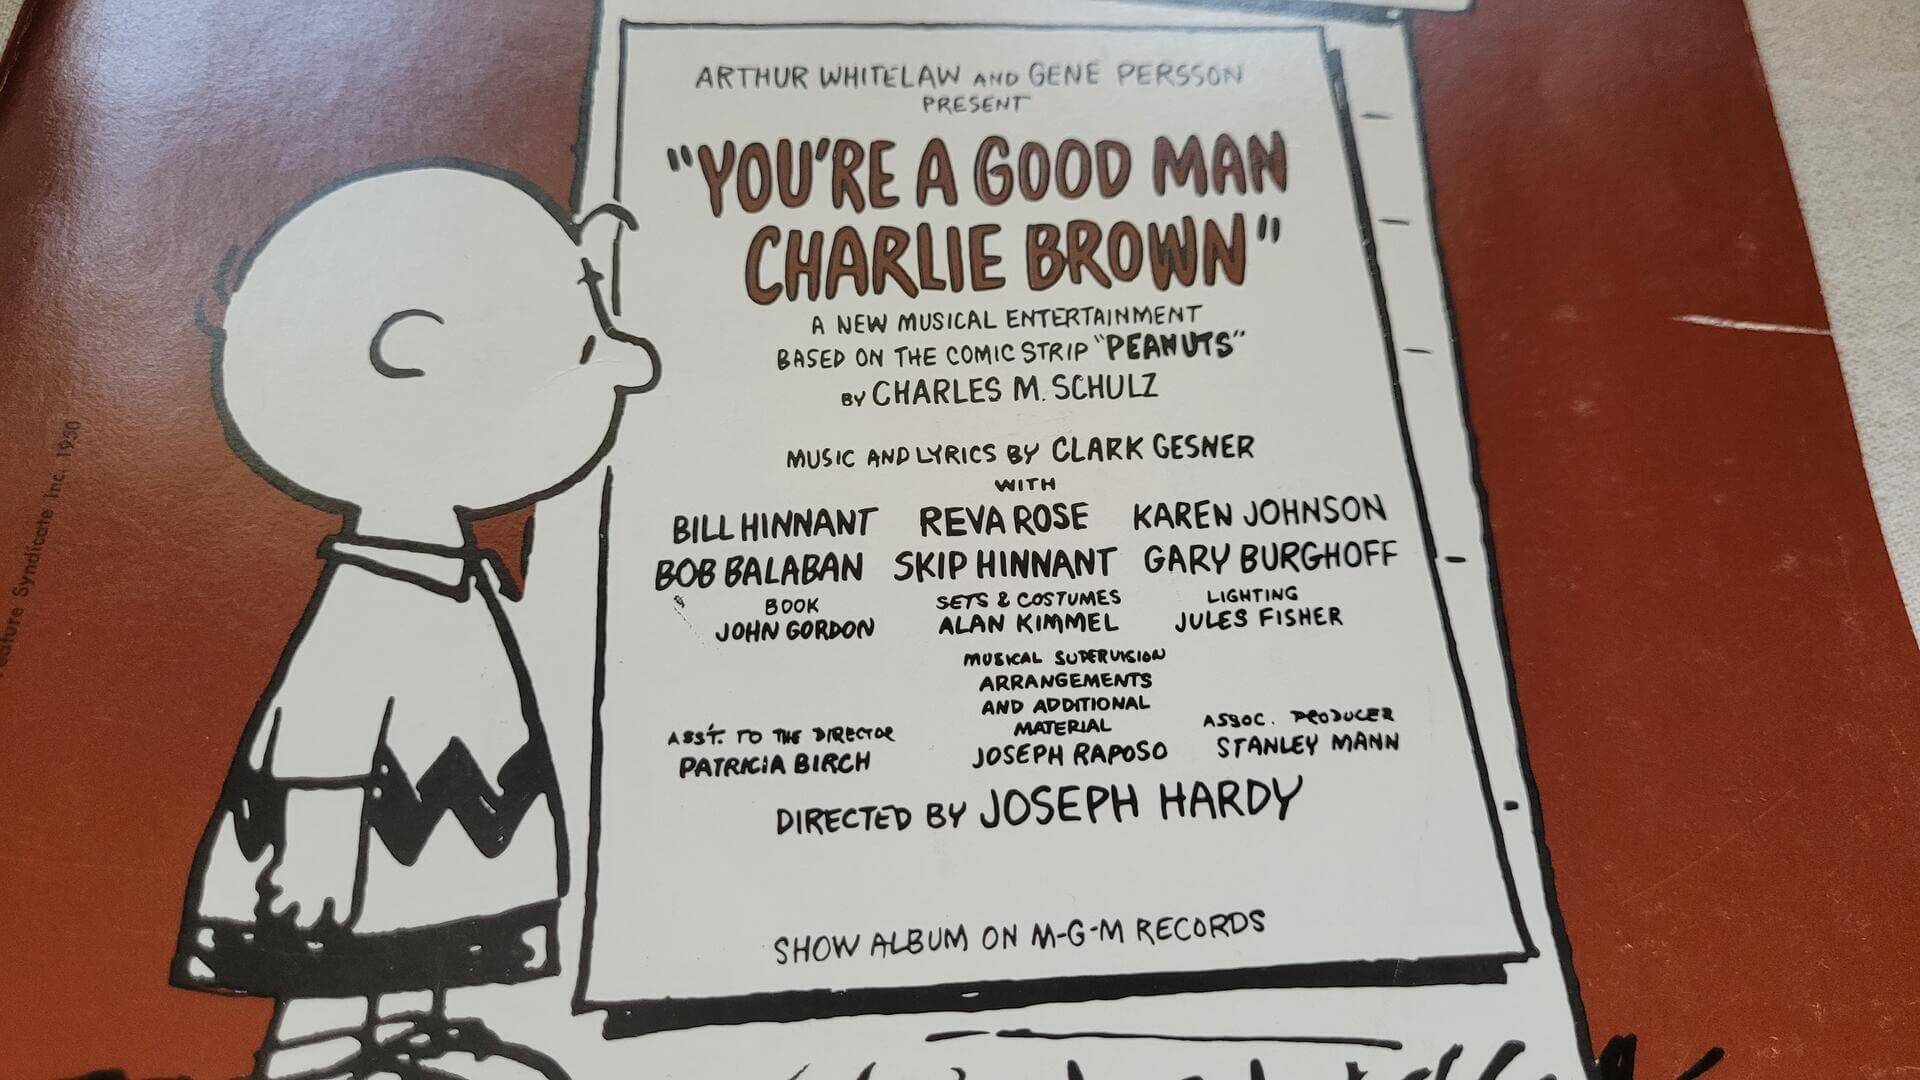 1967 You’re A Good Man, Charlie Brown Sheet Music Book by A Whitelaw G Persson - A new musical entertainment based on a comic strip Peanuts by Charles M Schulz, music and lyrics by Clark Gesner. Rare 1967 collectible music and comic book memorabilia